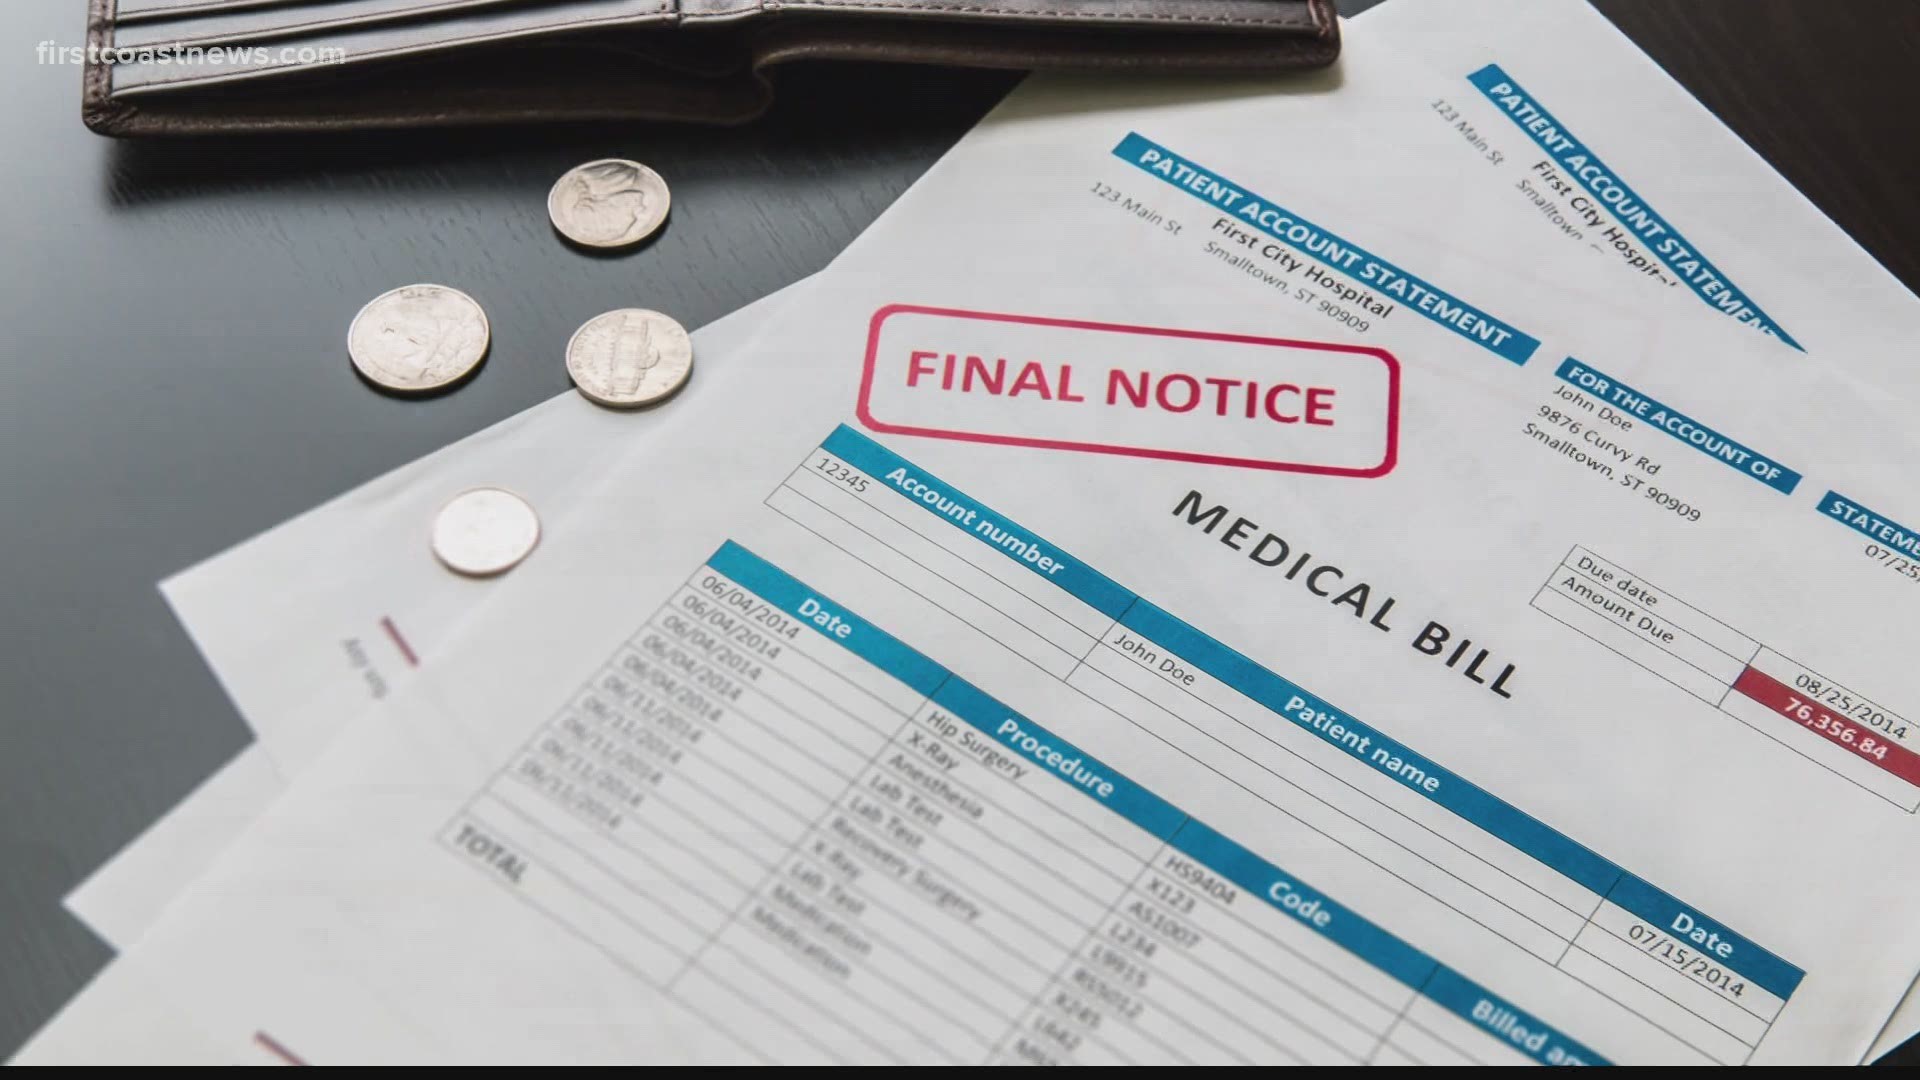 Have medical bills? Experts say 93% of people who challenge them get some sort of discount.